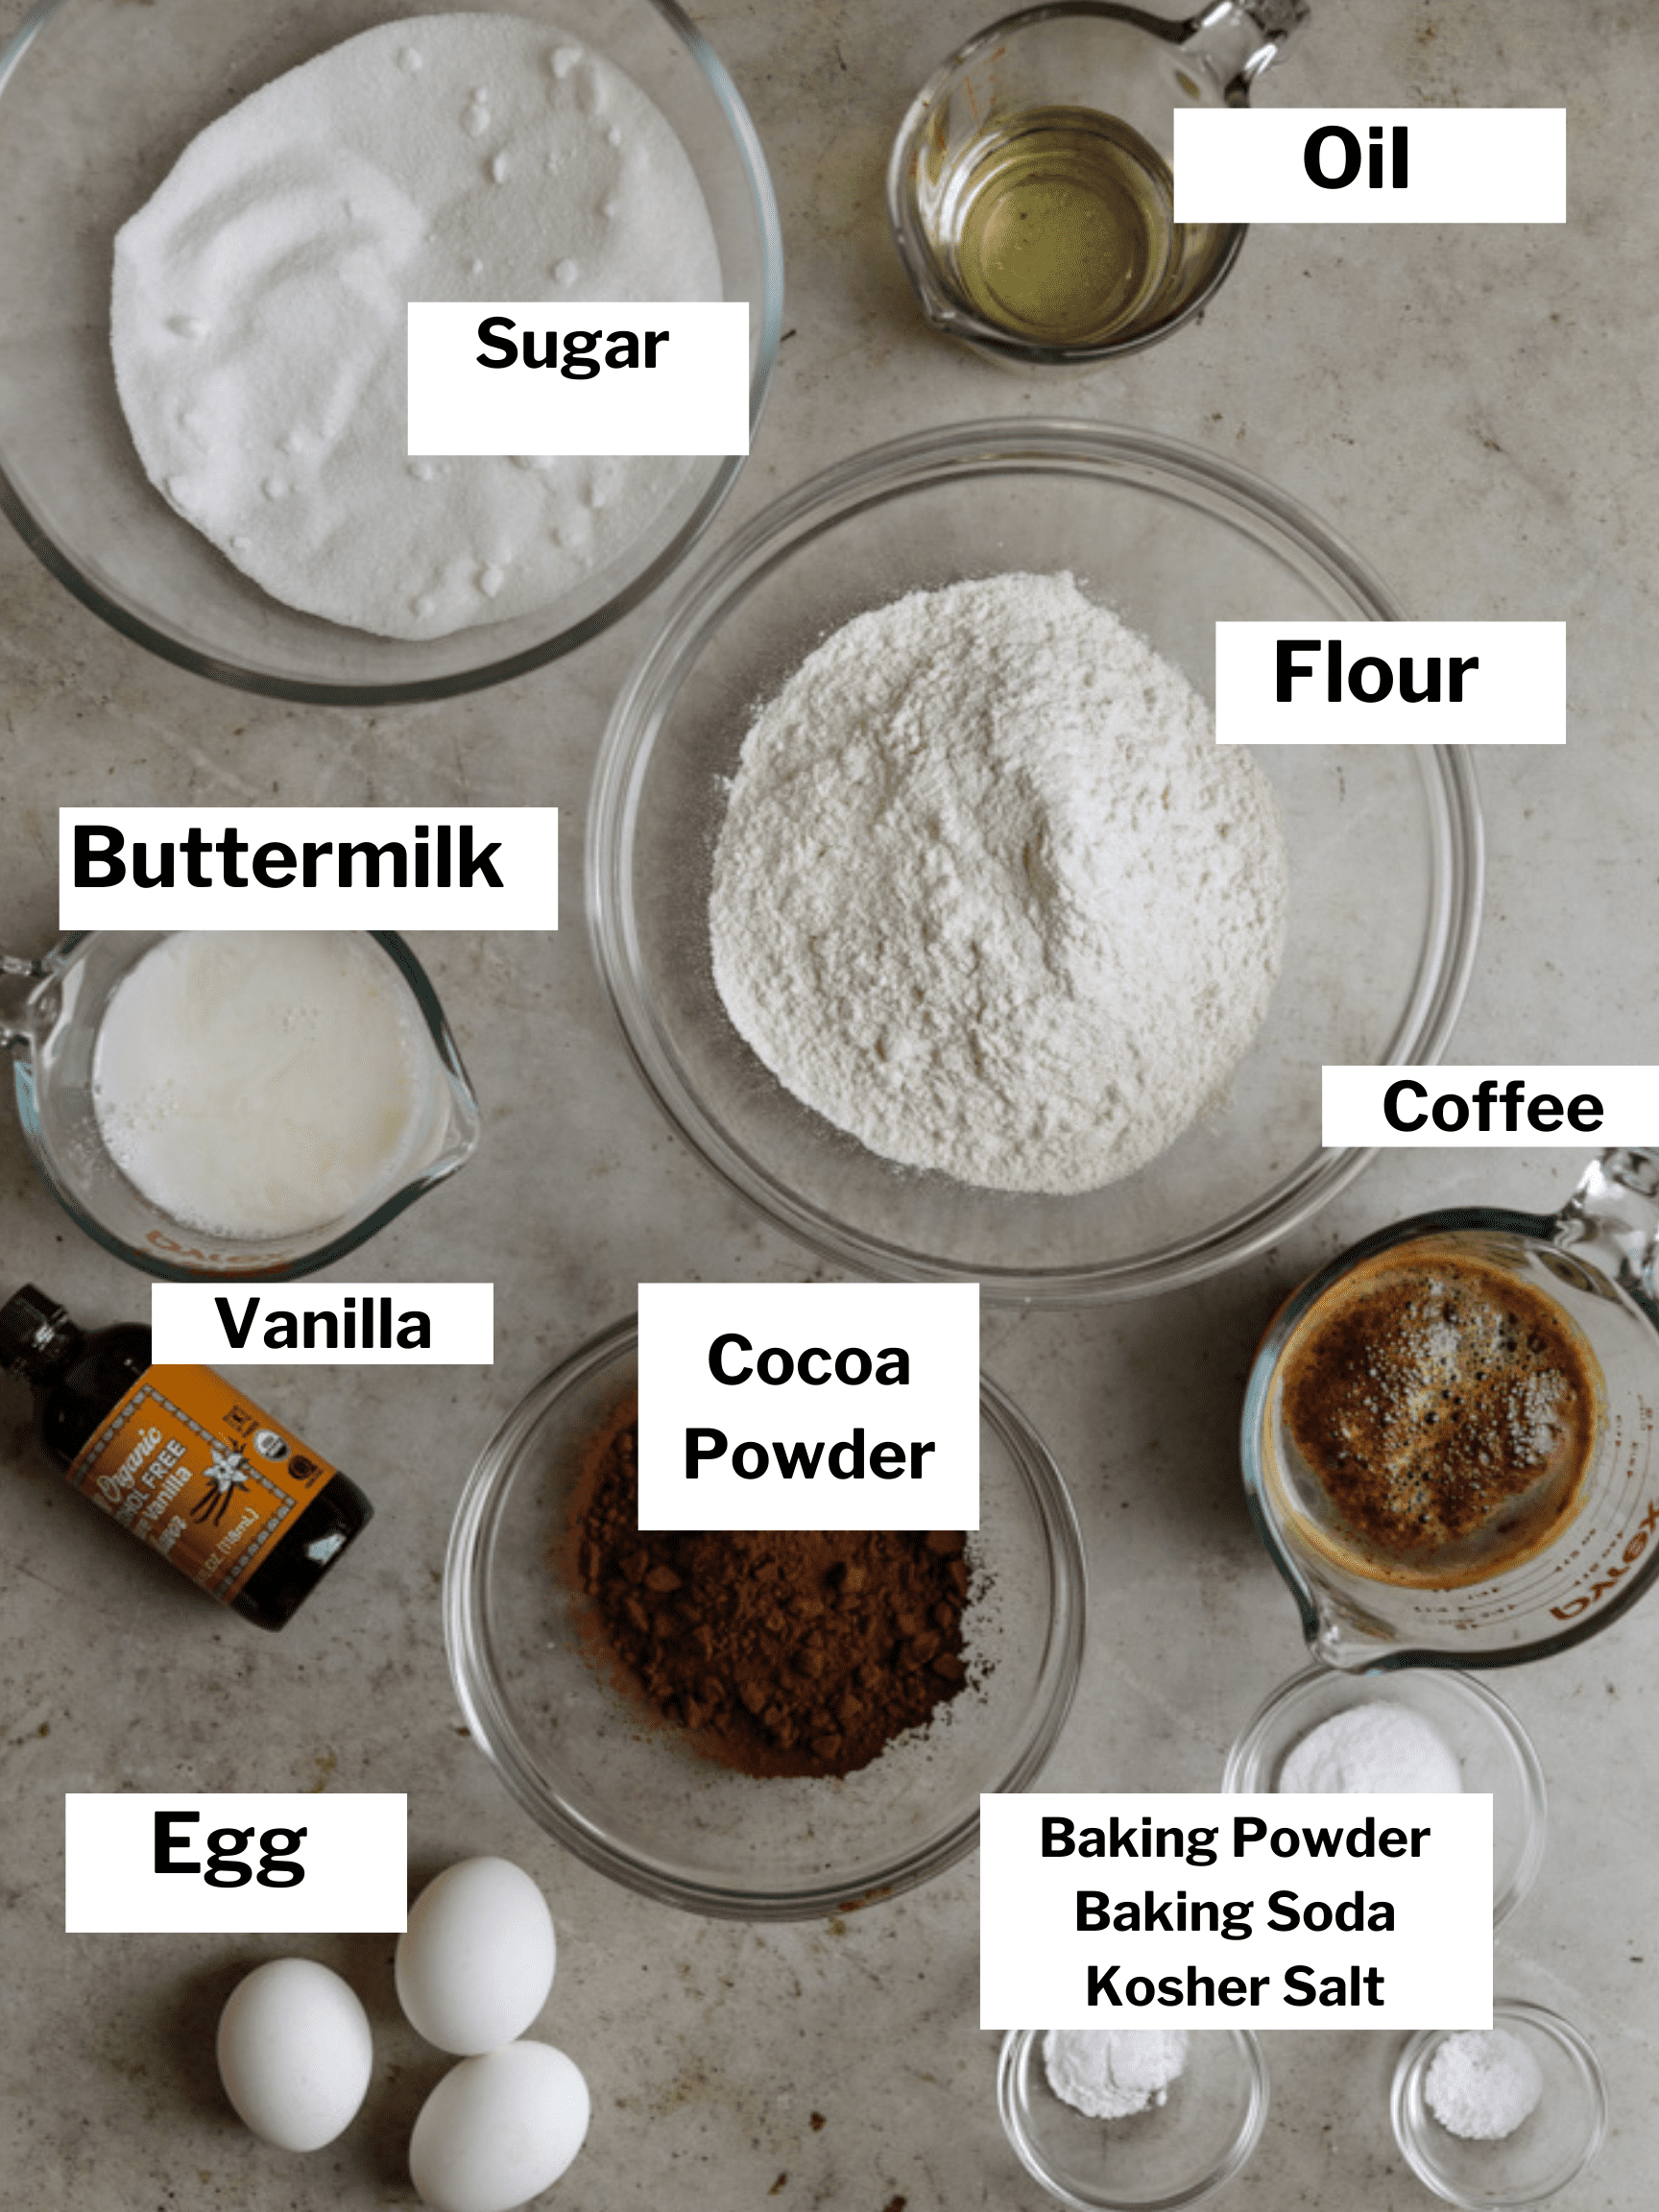 Ingredients for chocolate cake